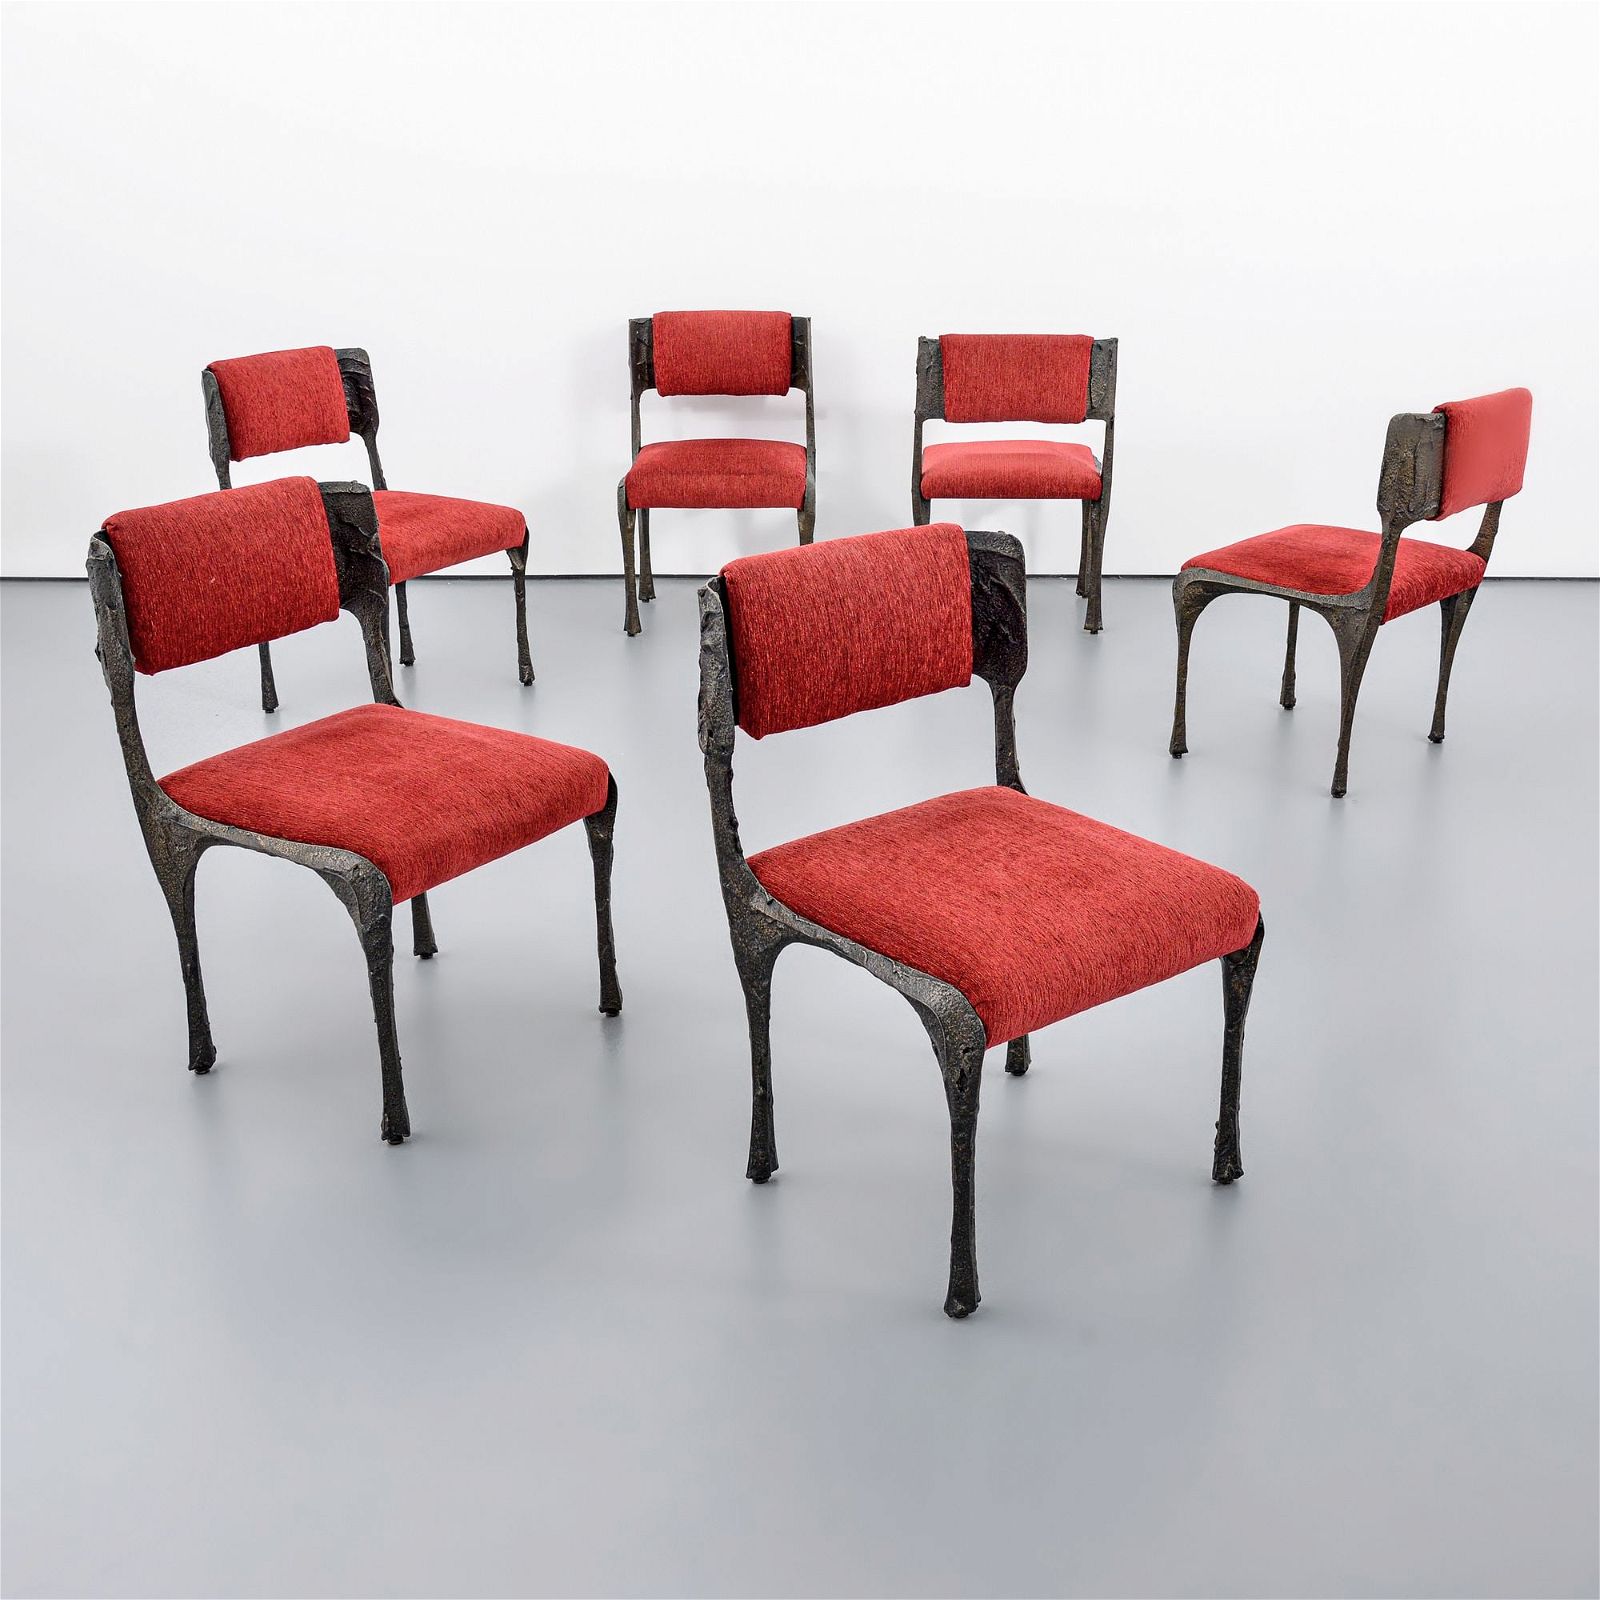 A set of six bronze sculpted side chairs by Paul Evans, dating to 1975, sold for $64,000 at Palm Beach Modern Auctions.